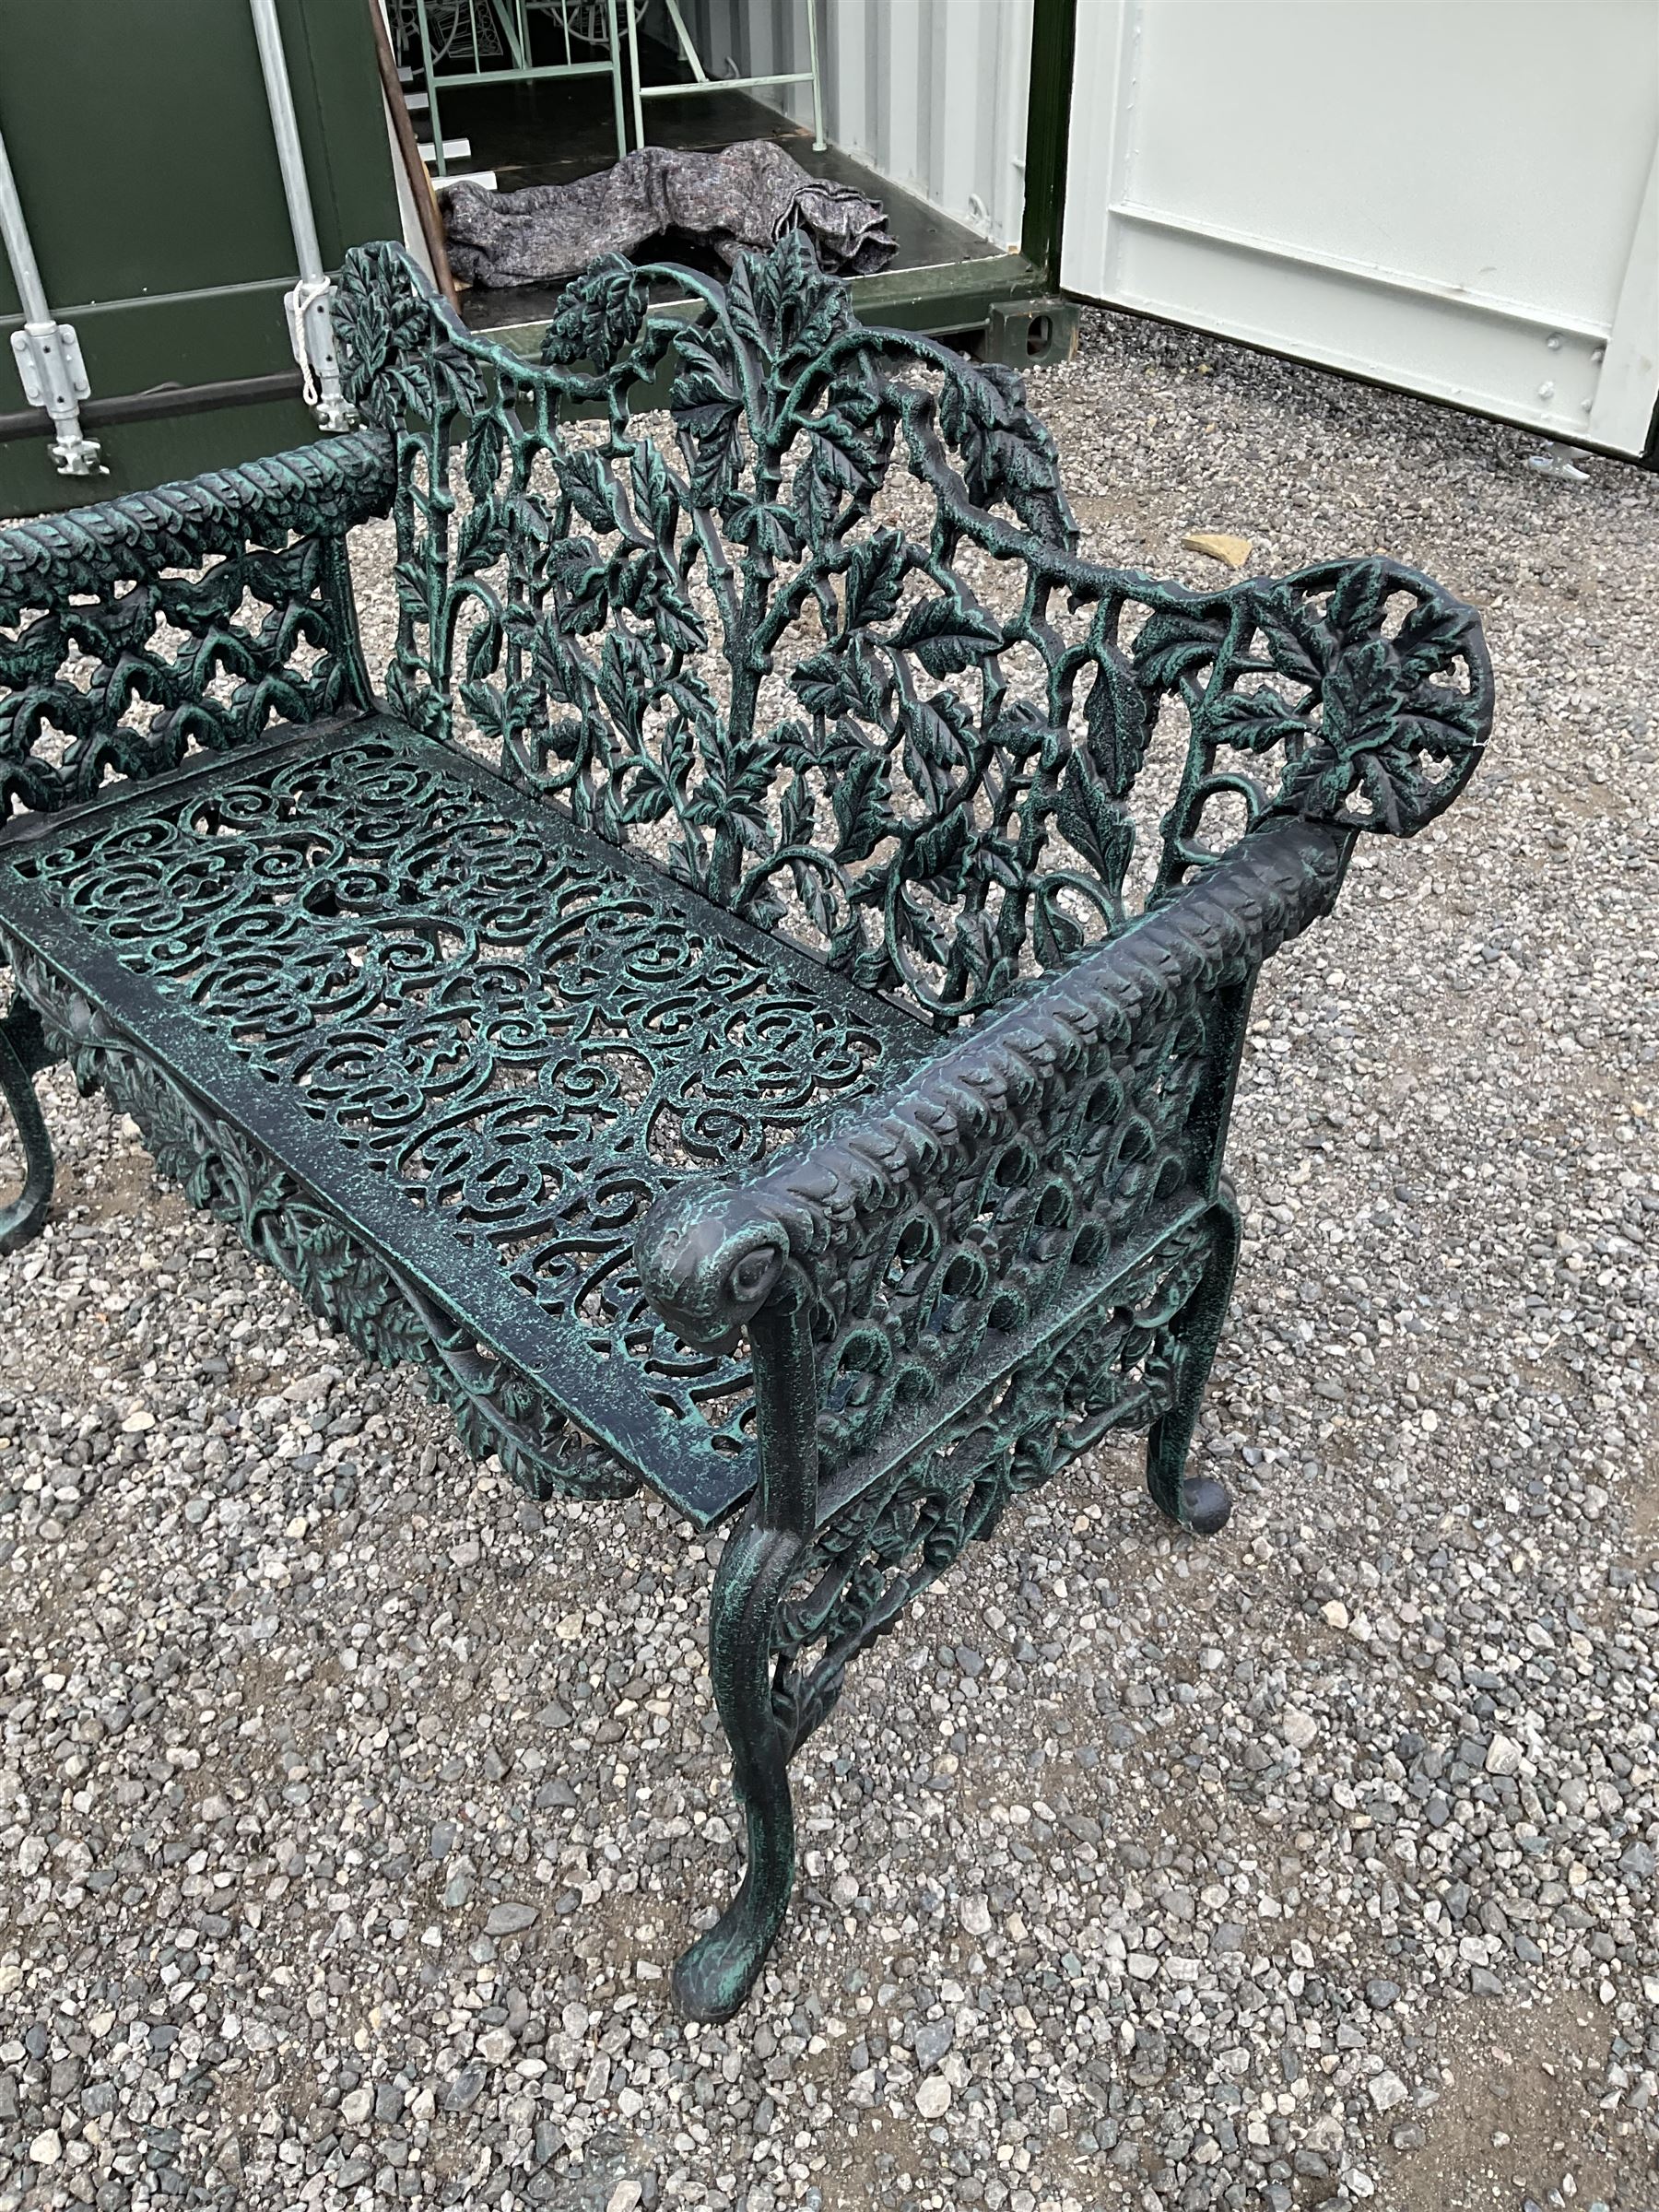 Victorian style cast iron garden bench - Image 2 of 4